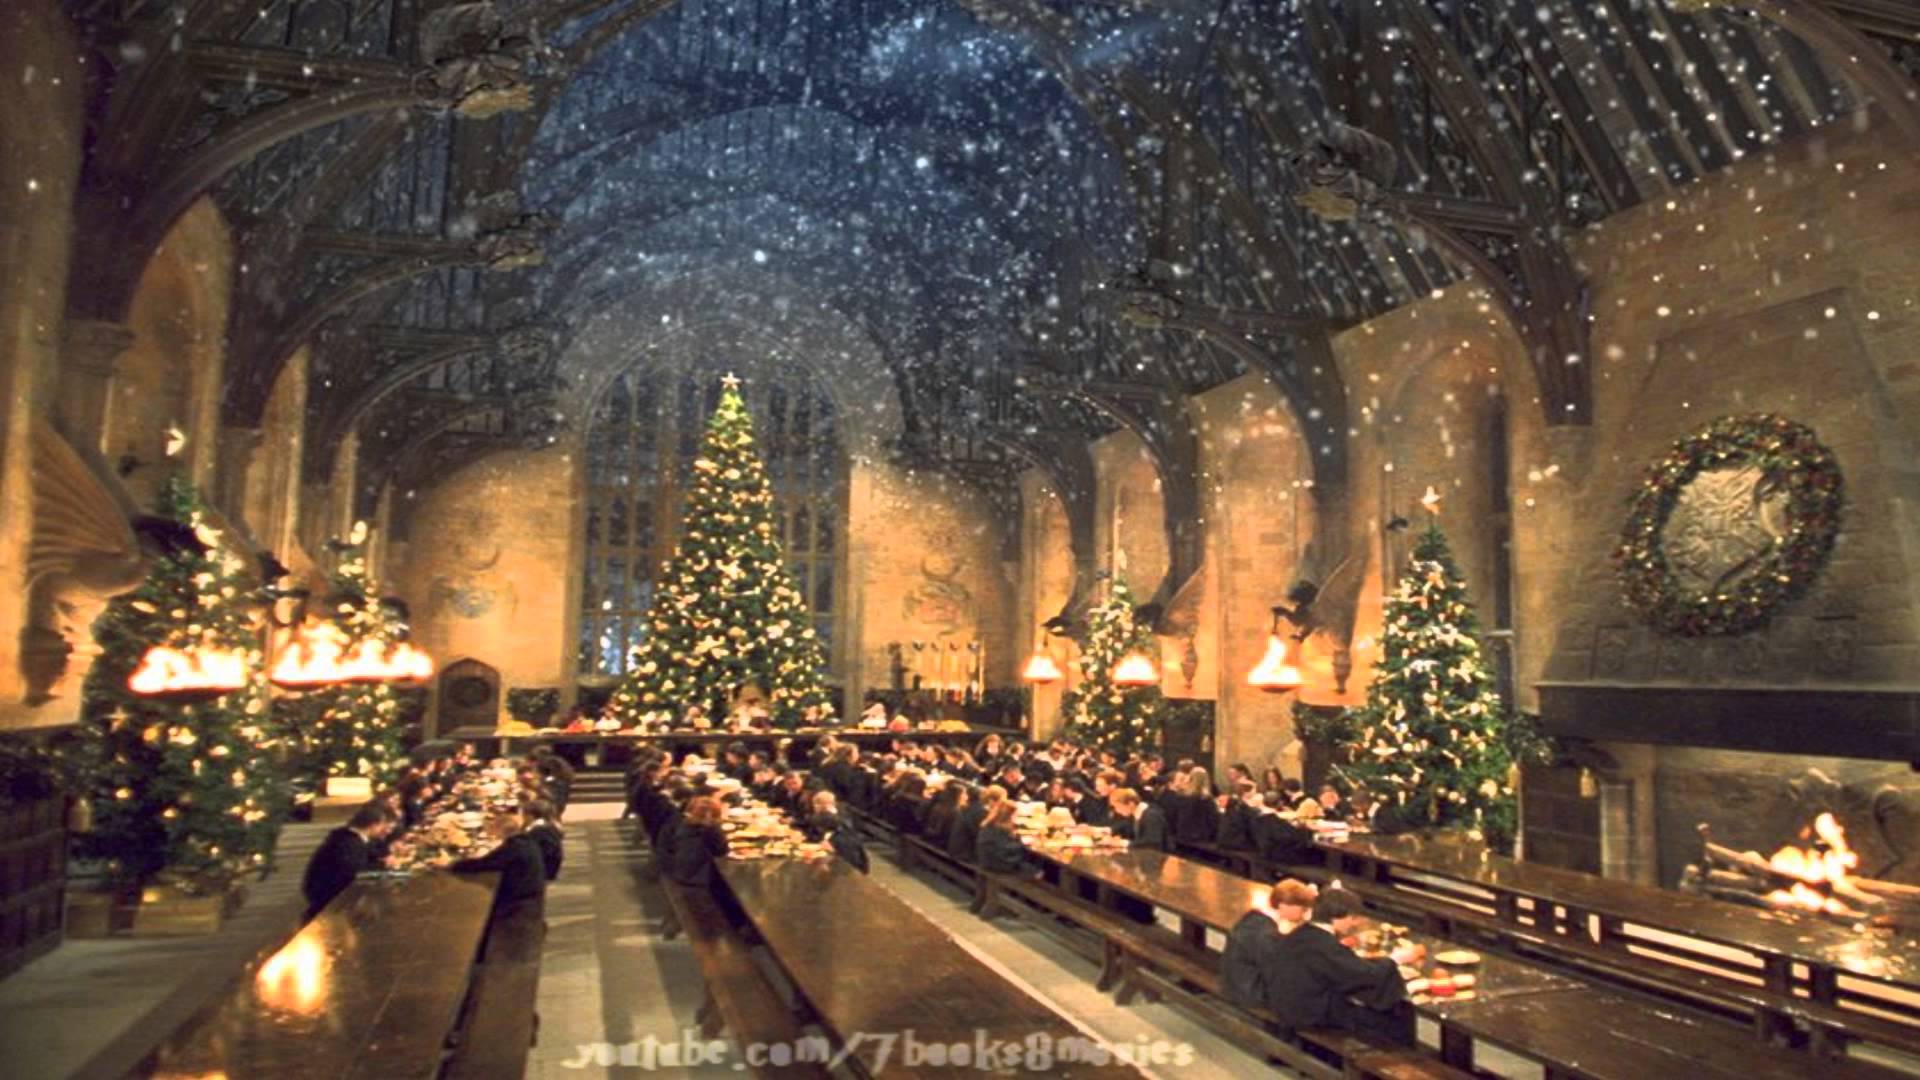 The Brothers Black   Hogwarts is Home for Christmas 1920x1080